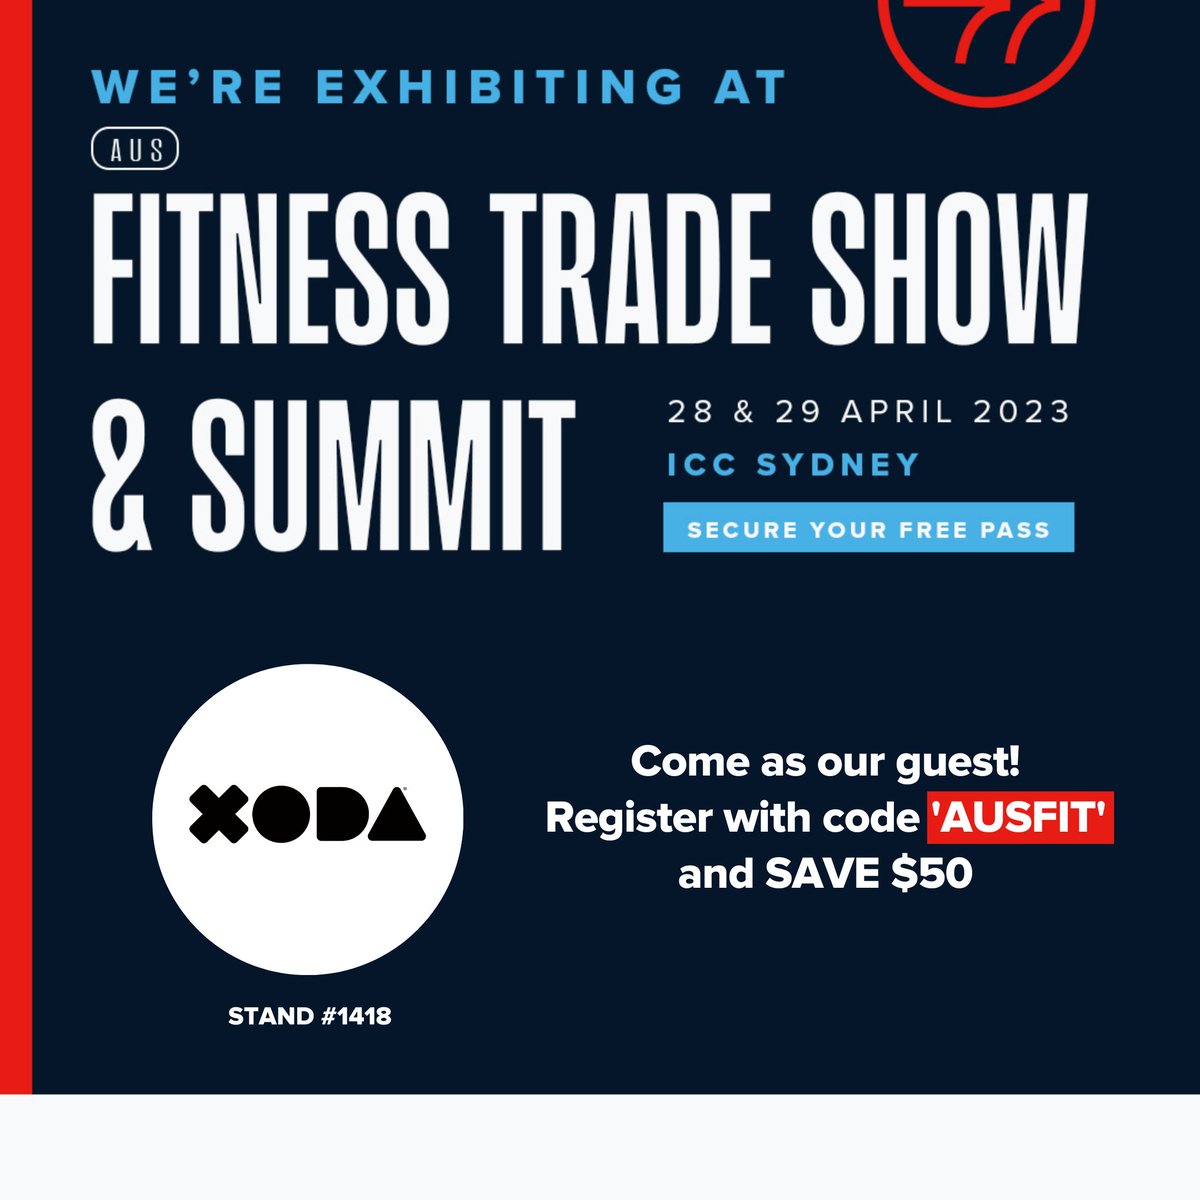 We look forward to attending AusFitness Industry on 28-30 April 2023 at ICC Sydney! Be sure to visit us at stand #1418 to learn more about XODA. 🌟

#ausfit #ausfitnessshow #ausfitness #fitnessindustry #sydneyfitness #activeaustralia #xoda #xodacom #crmplatform